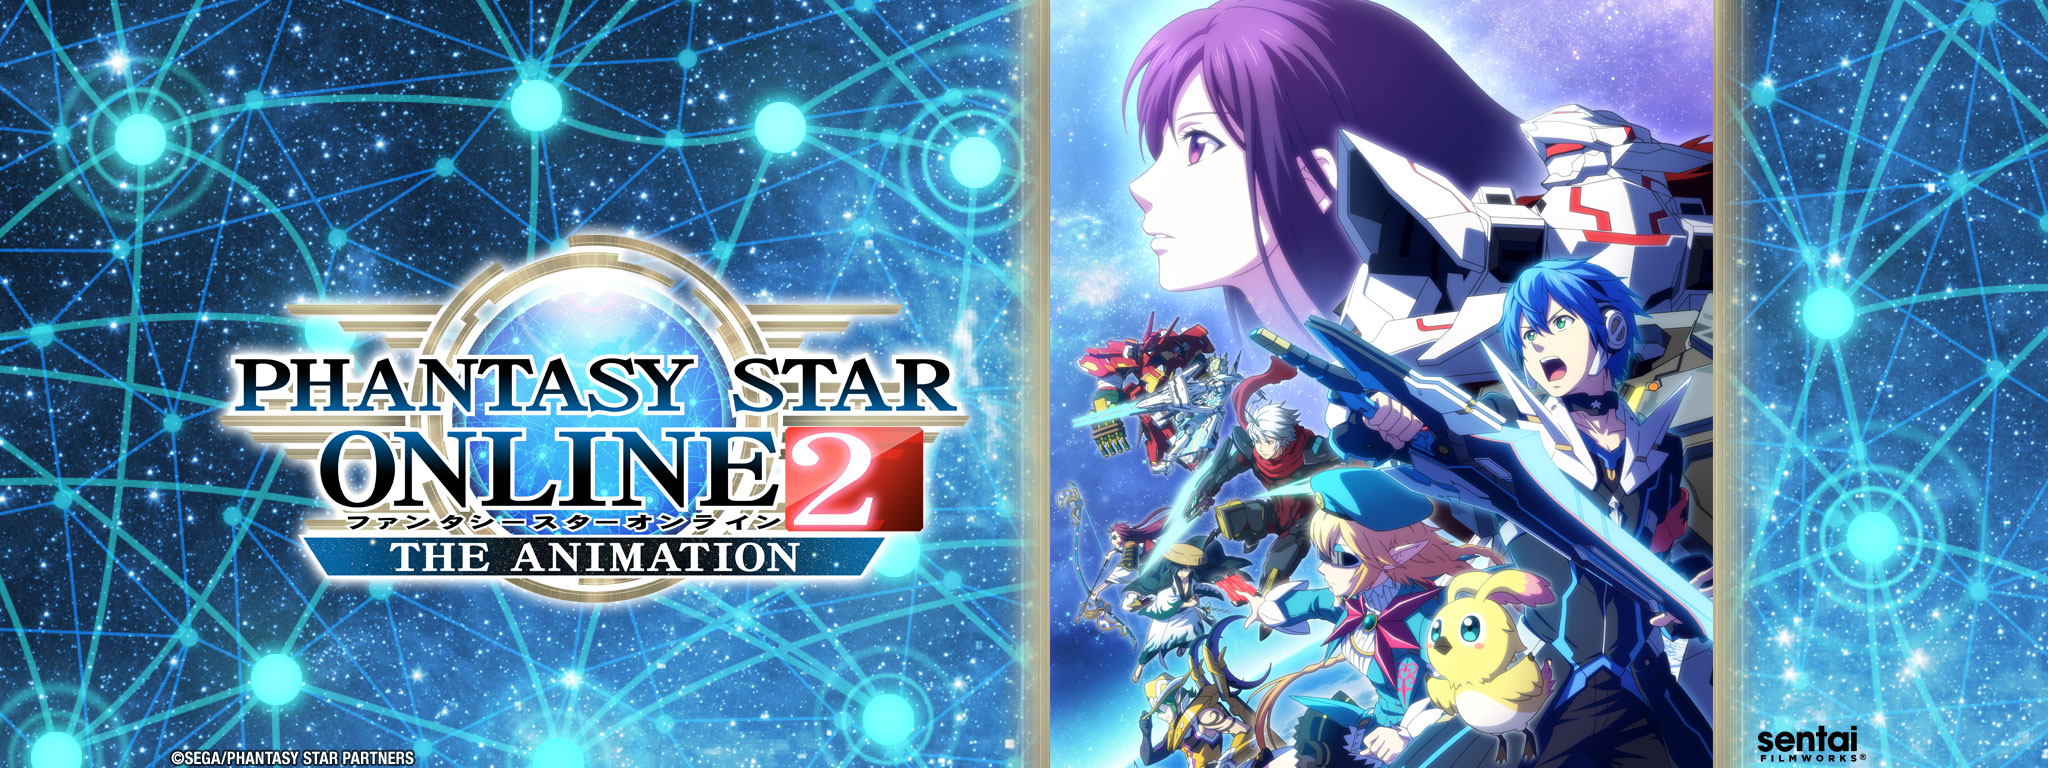 Title Art for Phantasy Star Online 2: The Animation